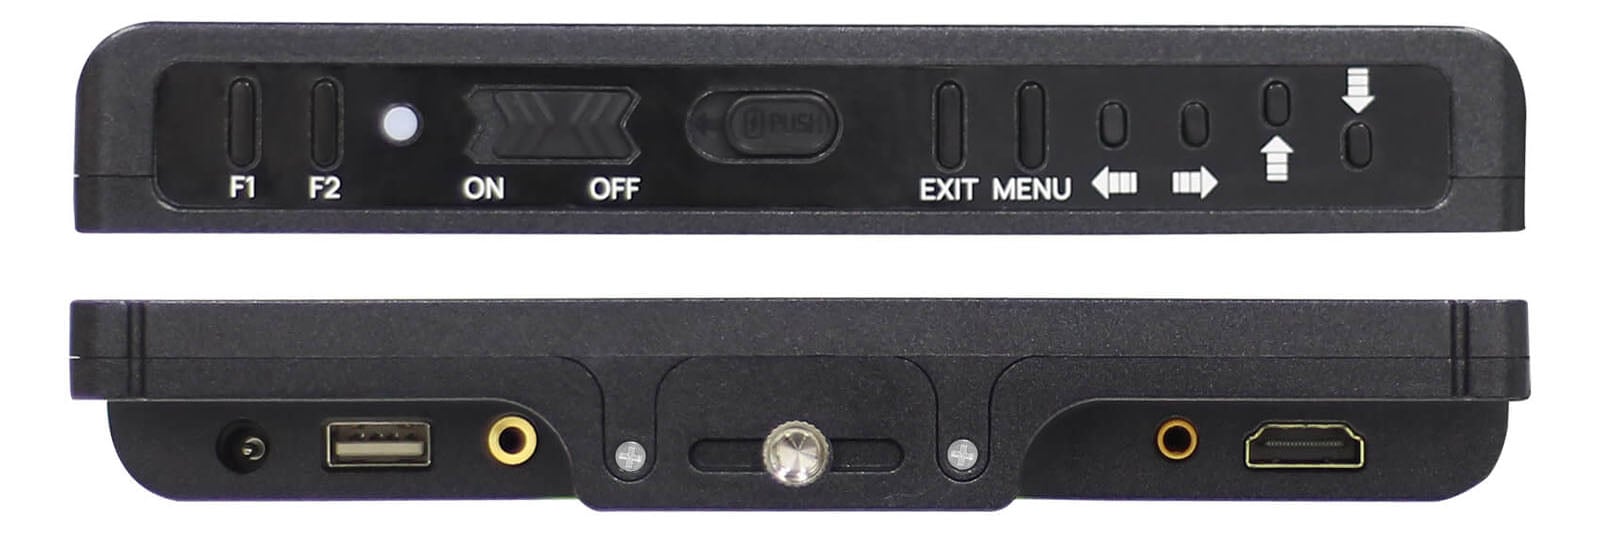 A close-up view of a black electronic device showcasing its control buttons and various input/output ports. The top section displays buttons labeled F1, F2, ON, OFF, EXIT MENU, and several navigation arrows. The bottom section includes USB, audio, and HDMI ports.